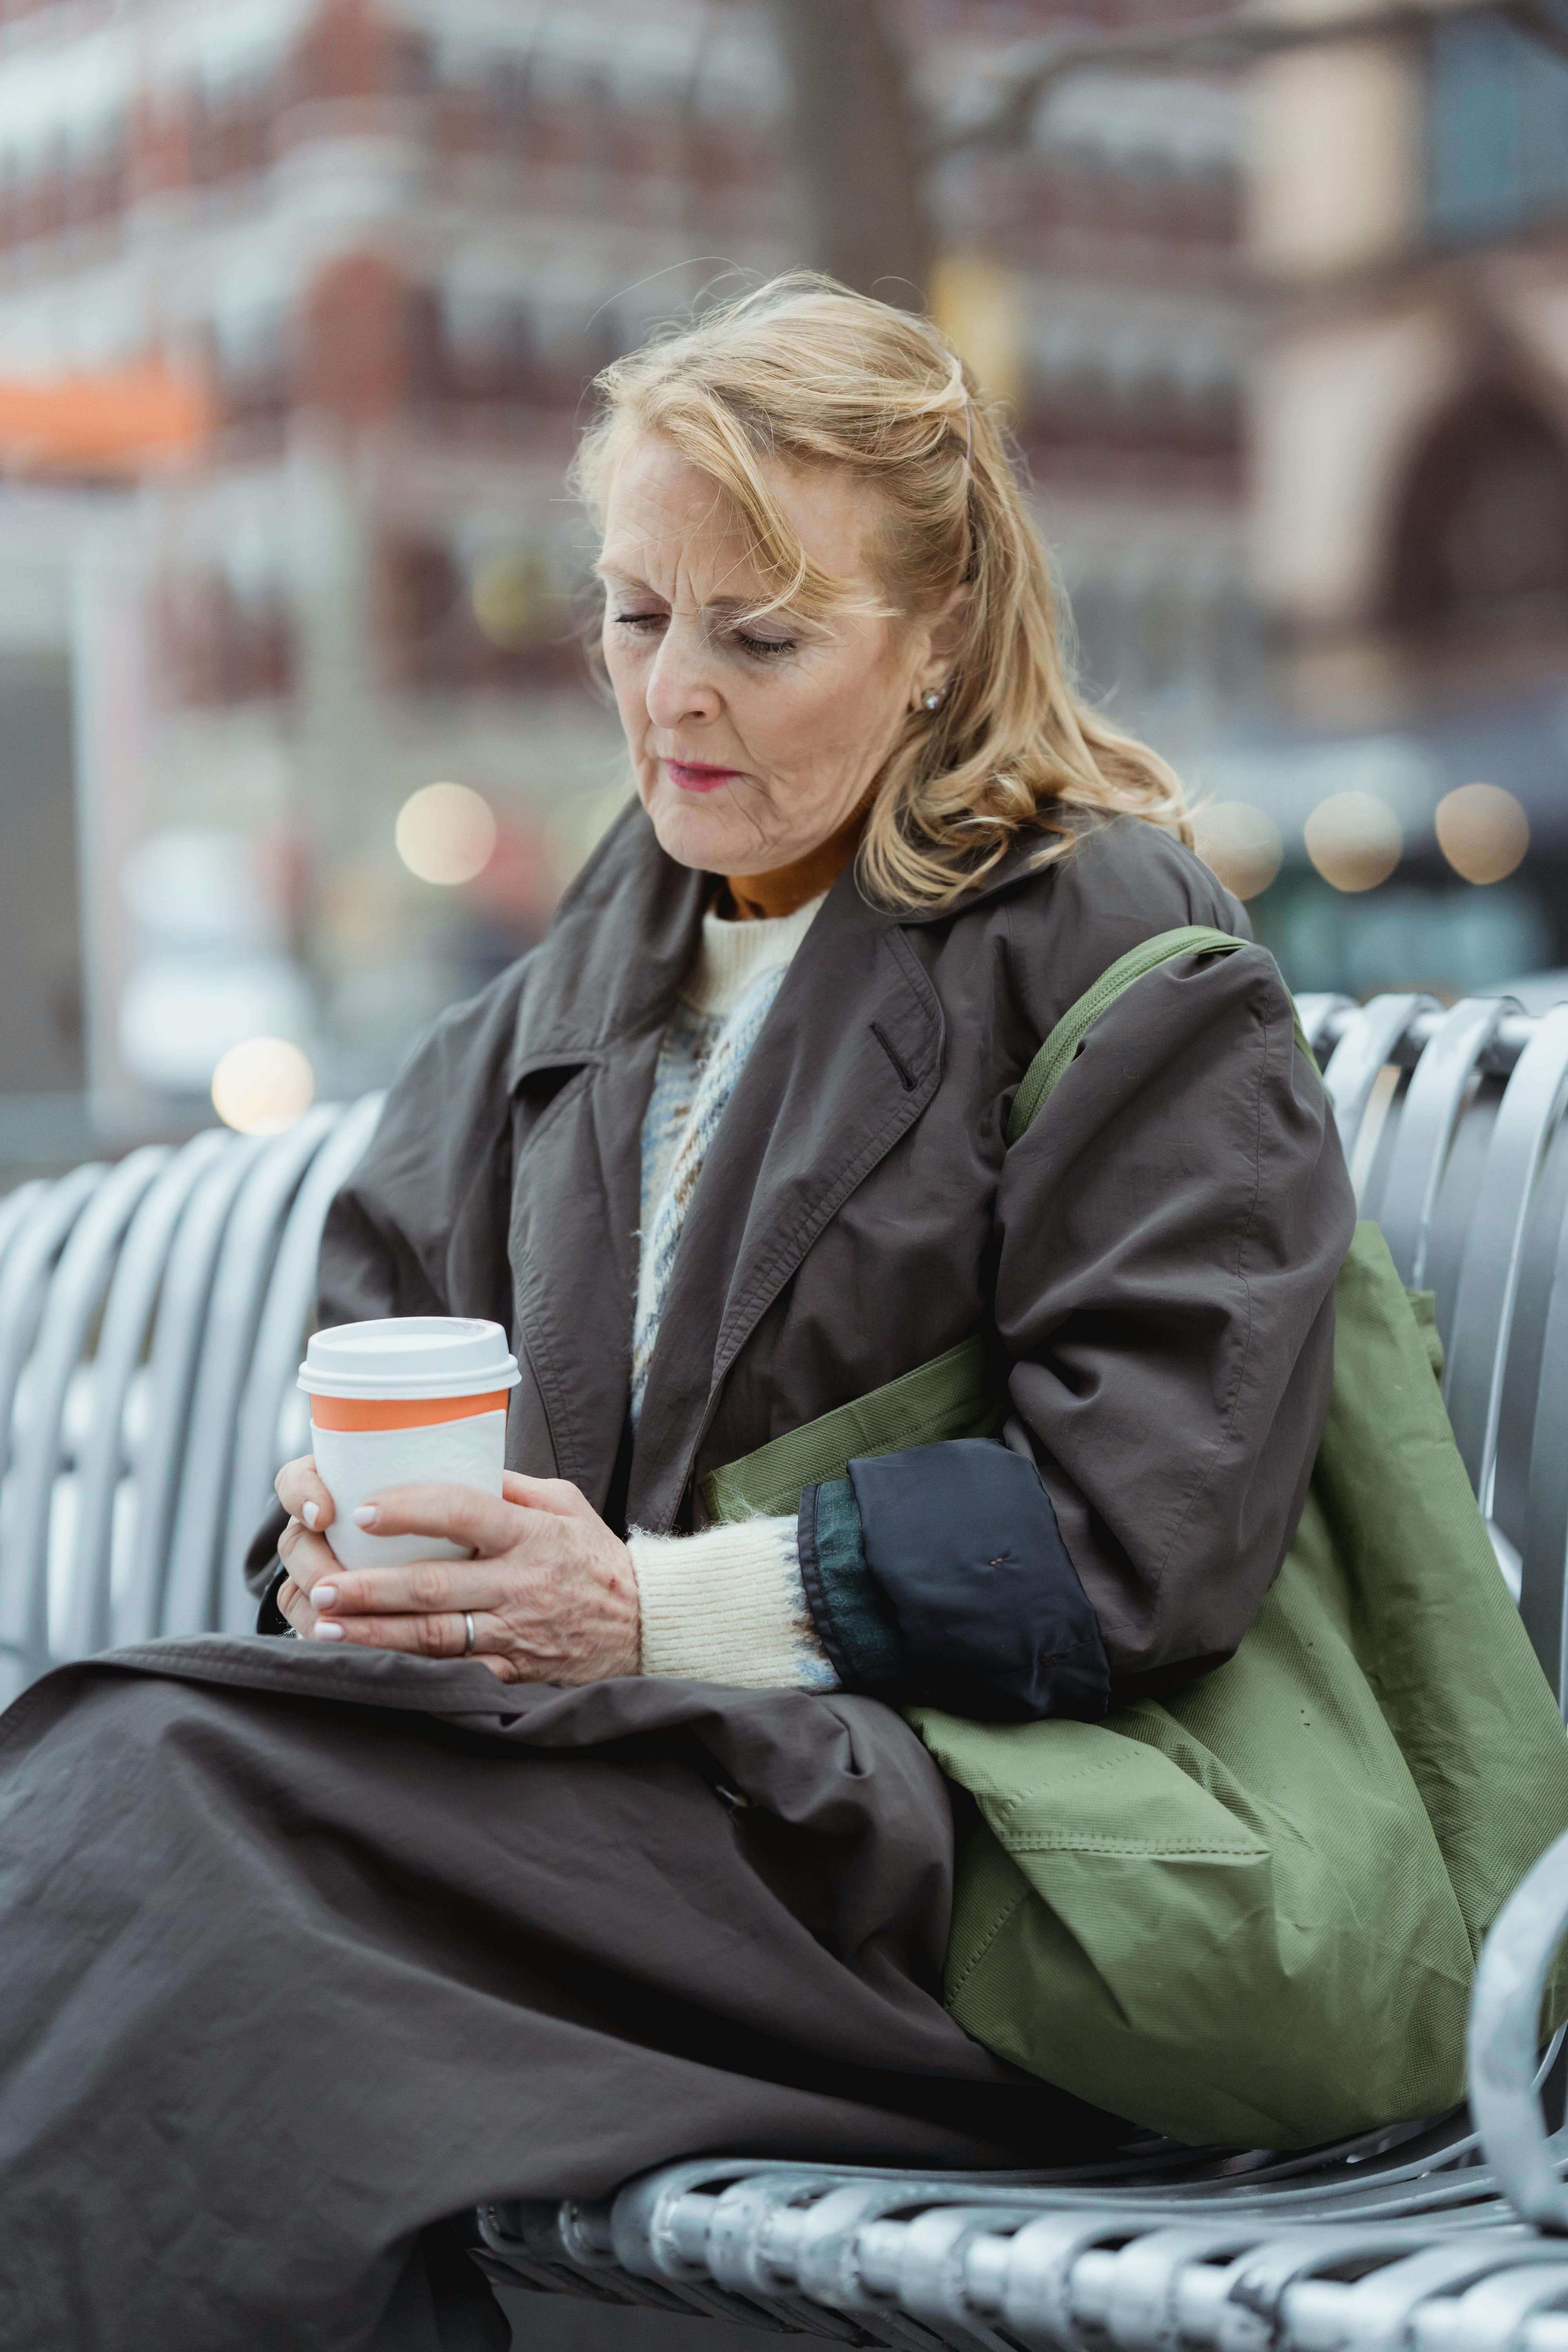 An upset older woman holding a beverage while seated on a bench outside | Source: Pexels